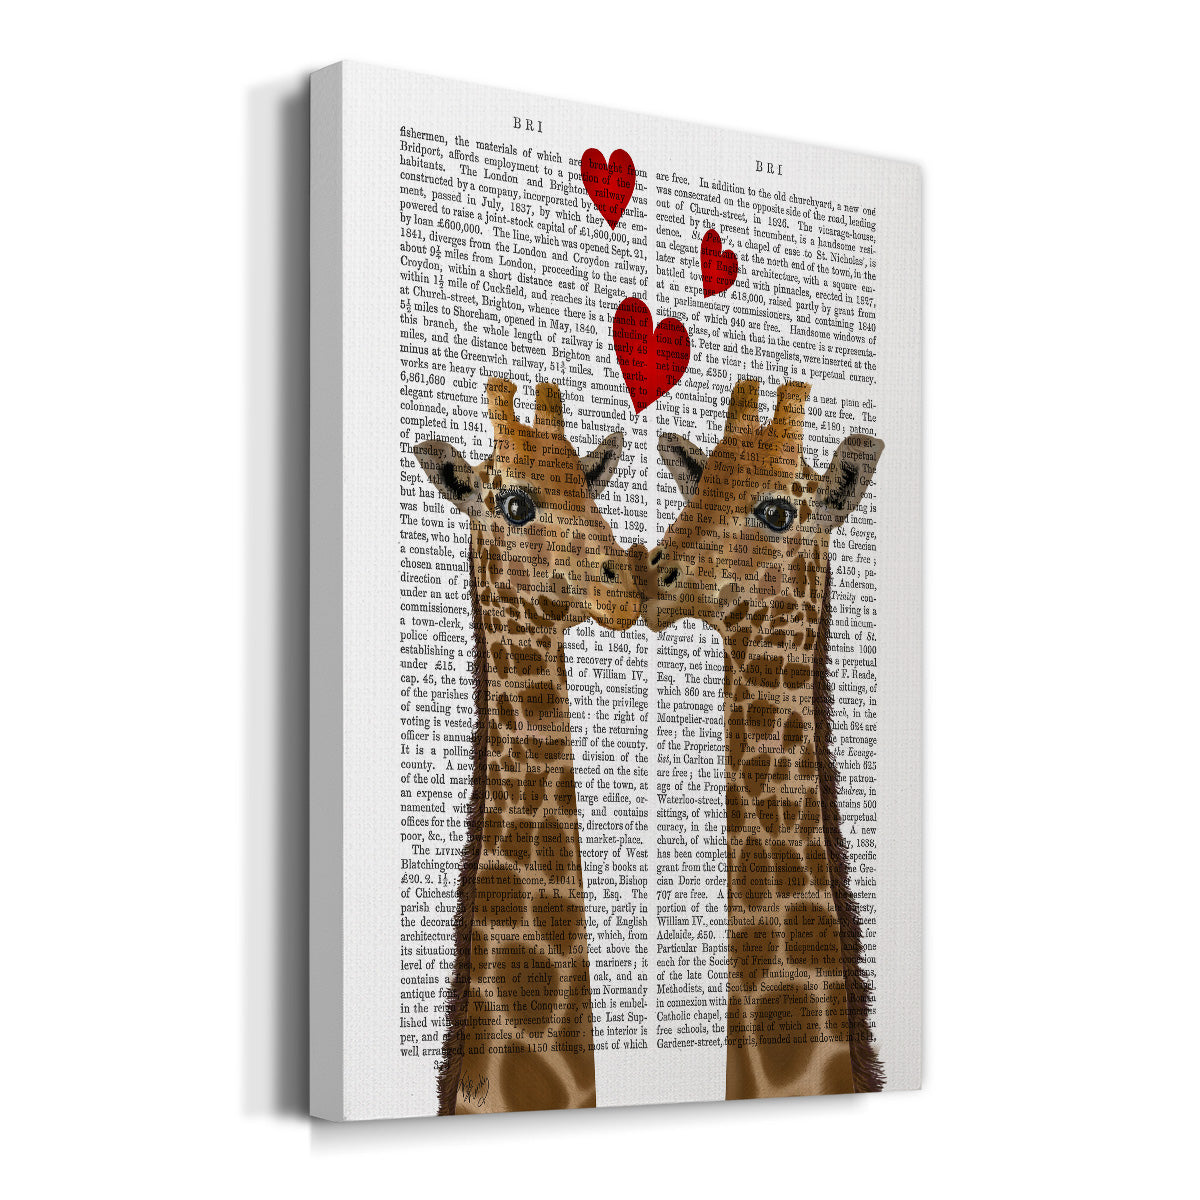 Giraffe Love Premium Gallery Wrapped Canvas - Ready to Hang